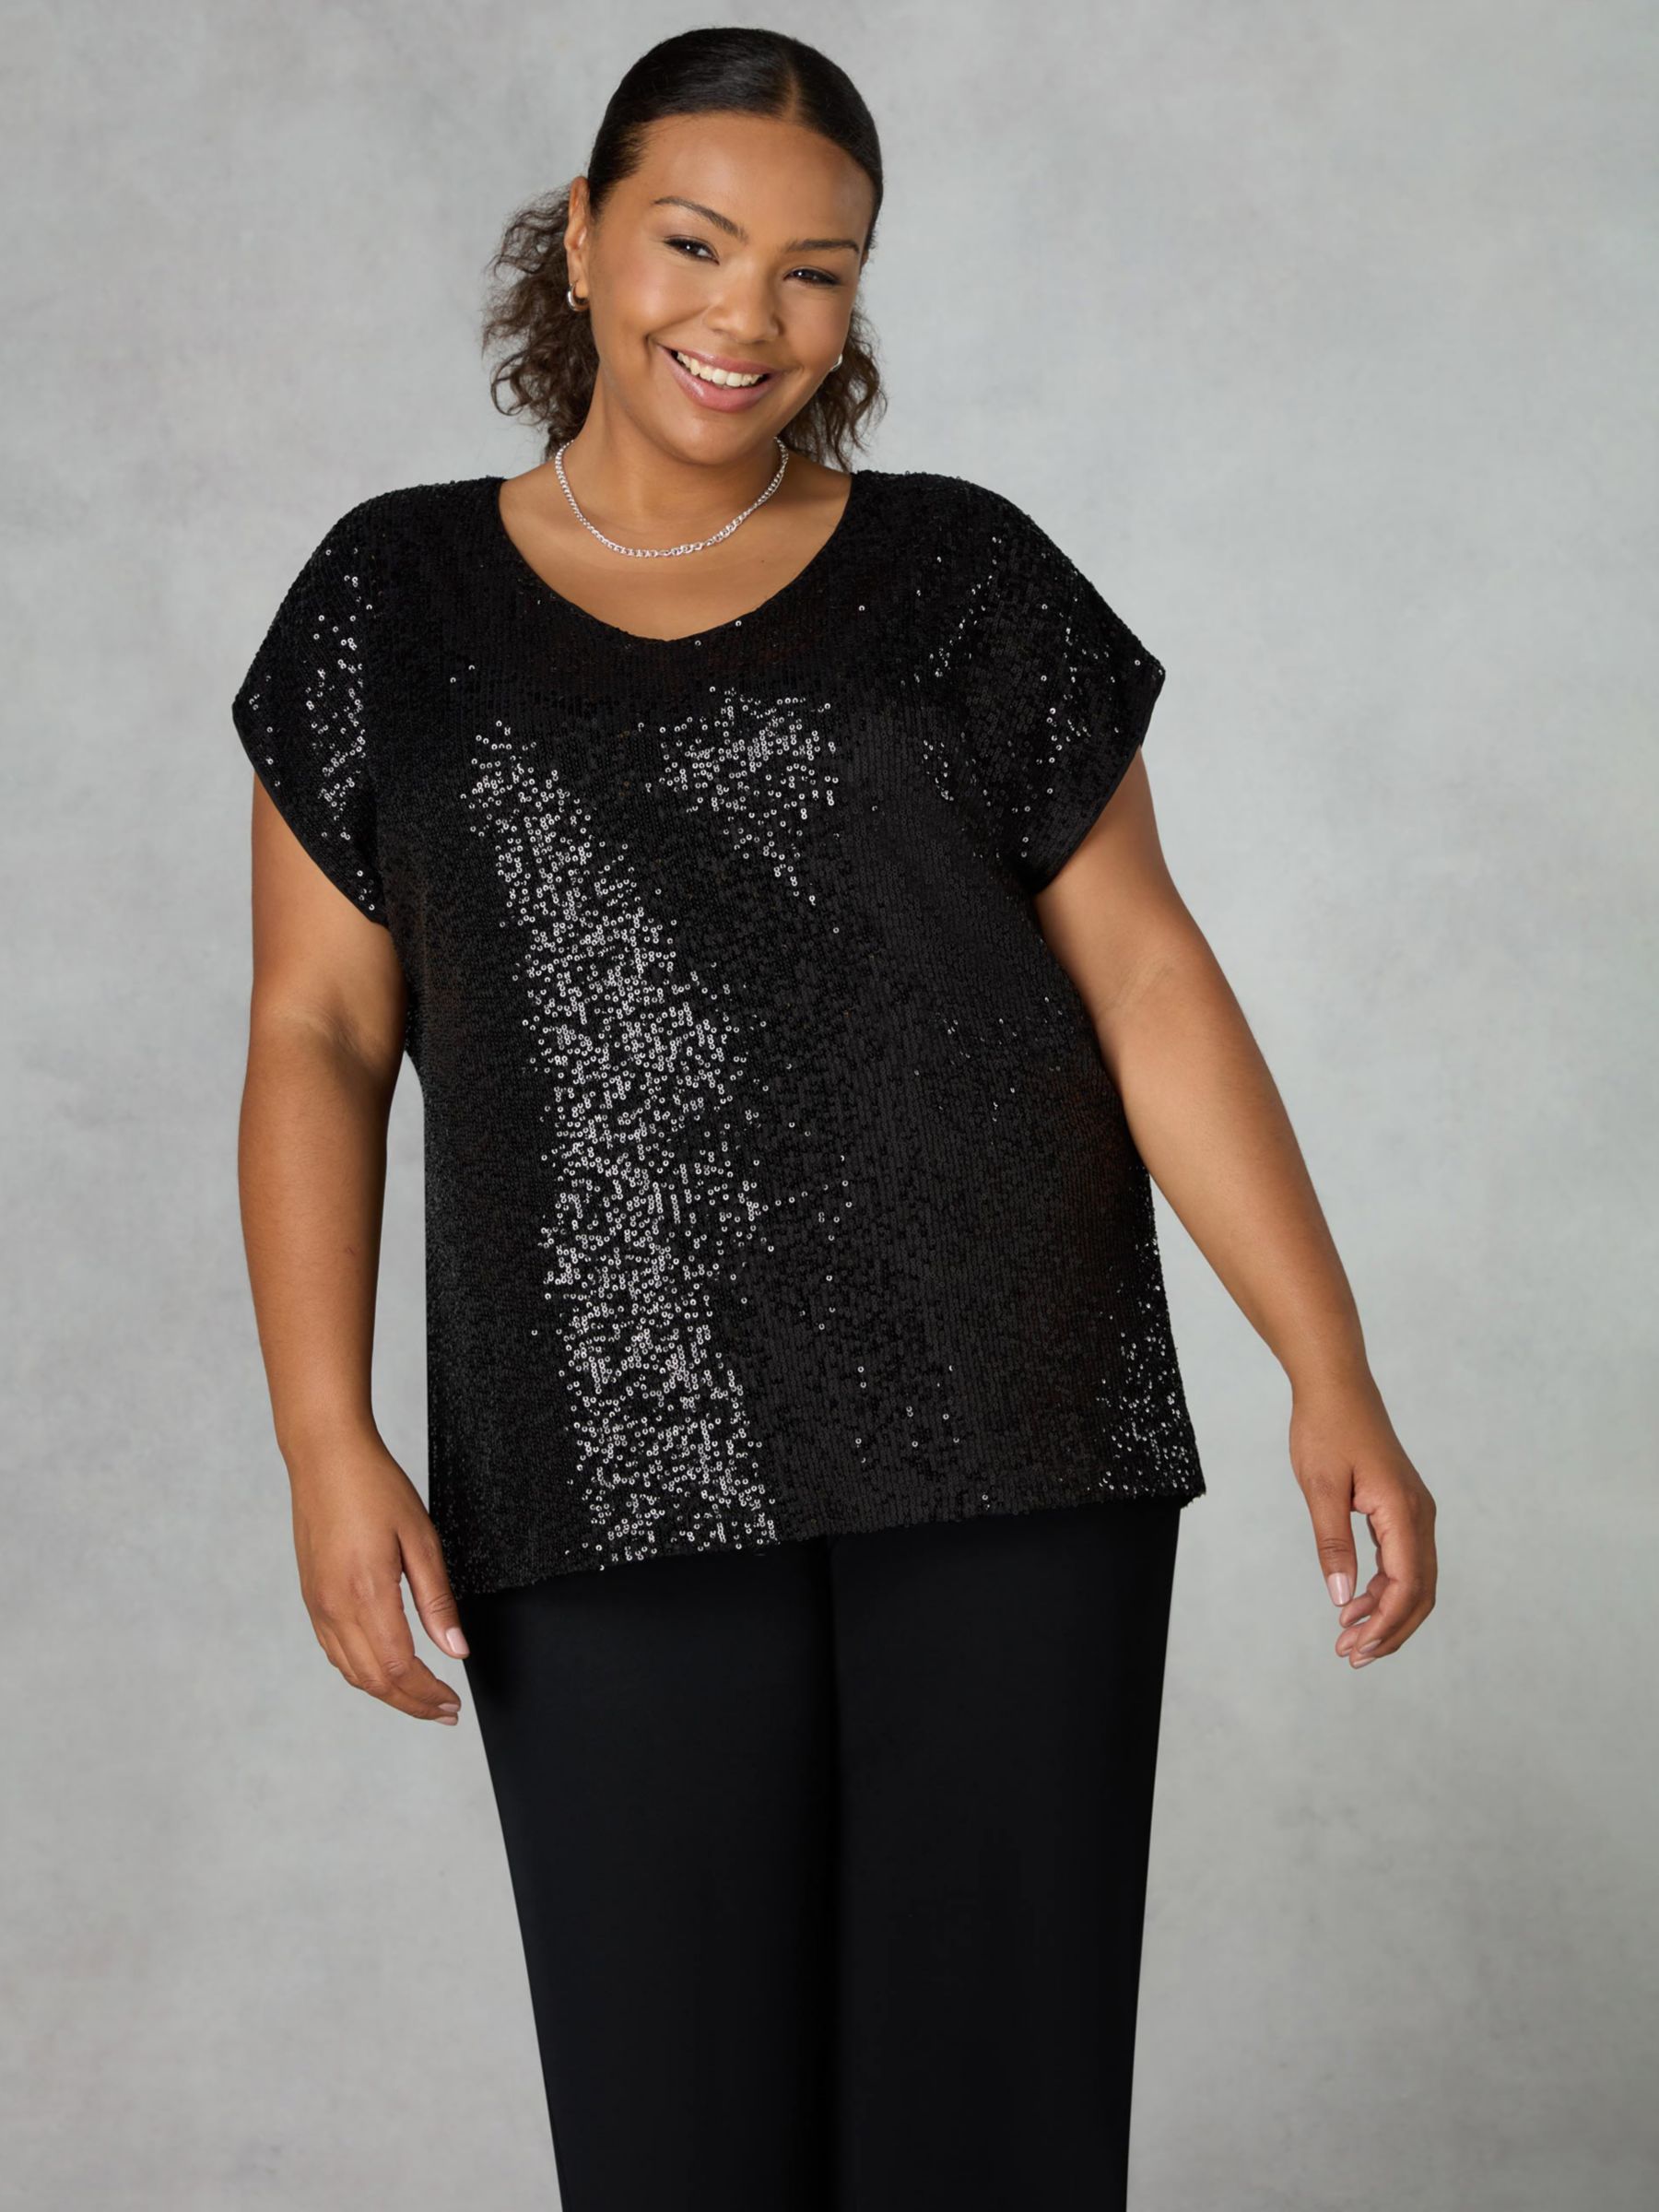 Plus Size Dressy Tops, Party & Evening Tops